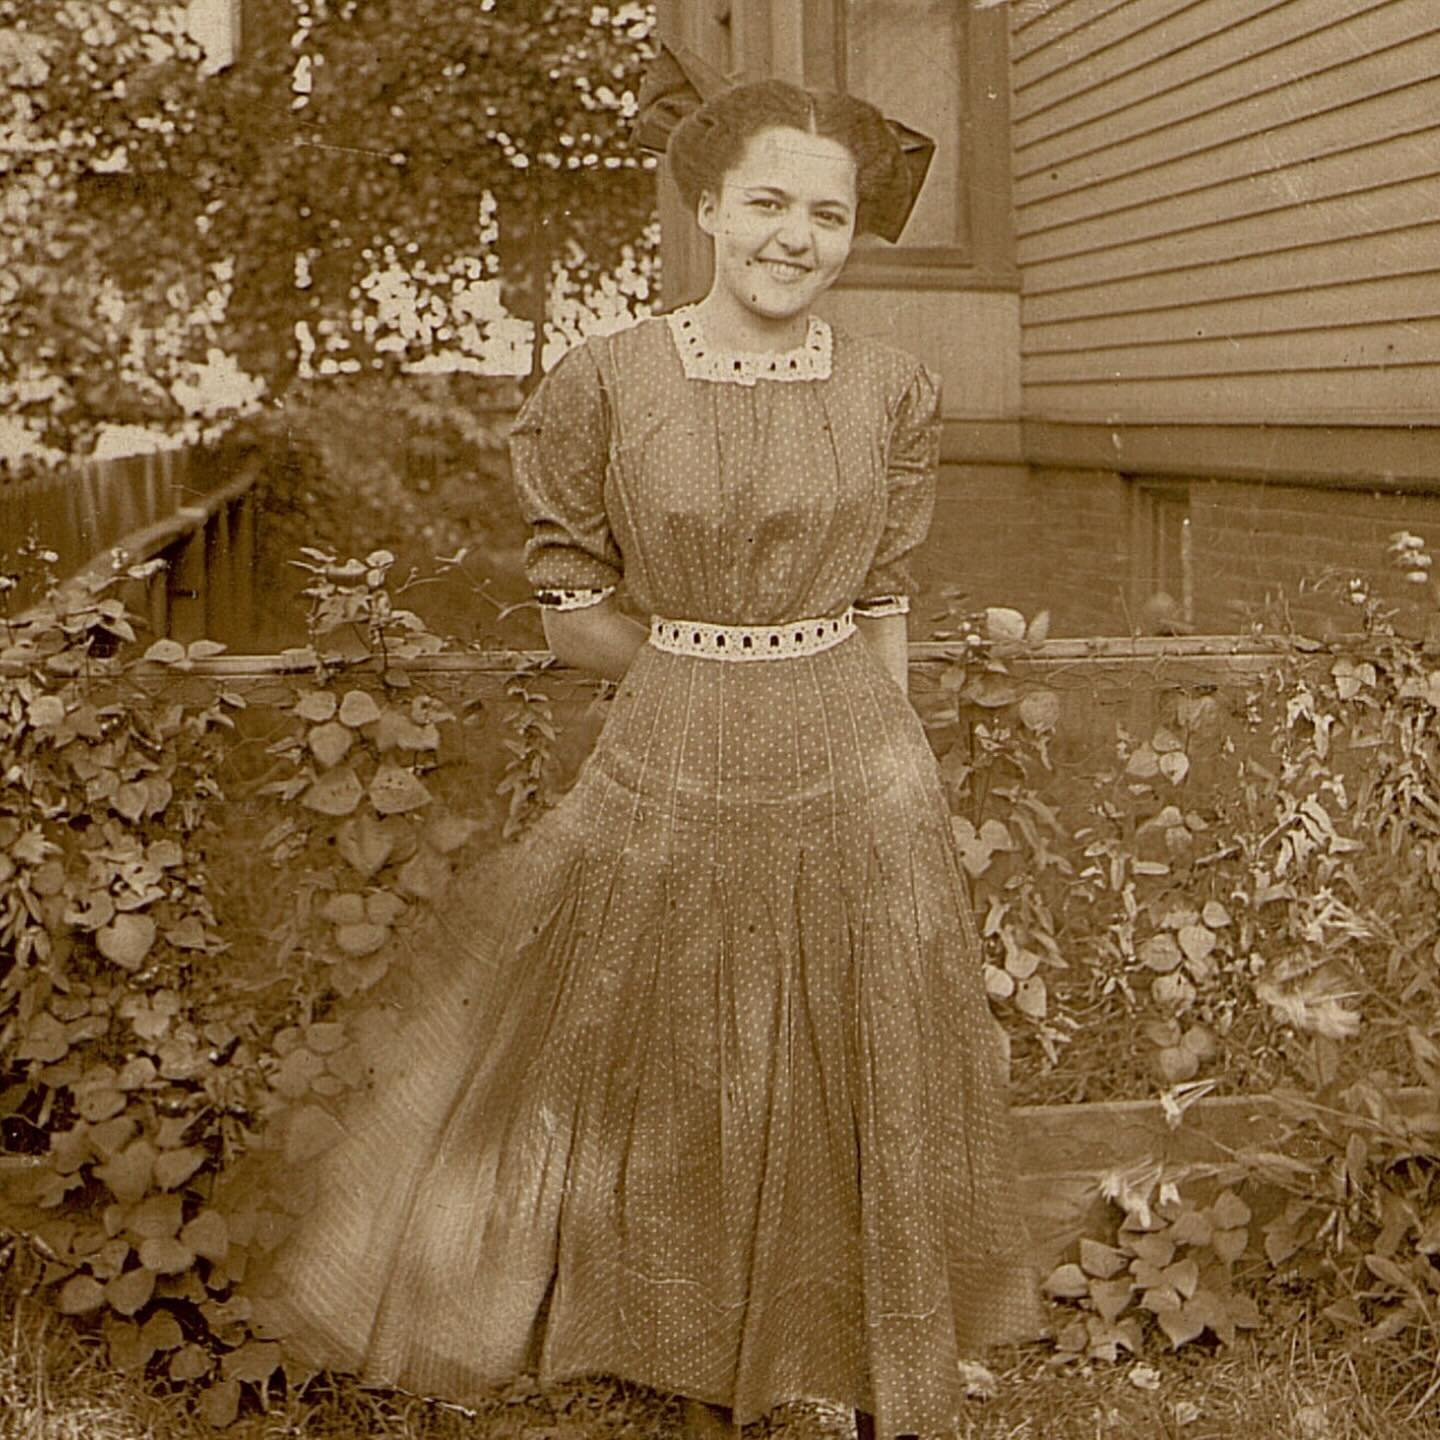 c 1890-1920, outdoor portrait of a smiling young lady identified as &ldquo;Jack&rdquo; Ann Louise Shaw {*a beaming smile for your Wednesday 🌻haven&rsquo;t had much time to research lately but just found this gem and felt it necessary to share. 
 
Th